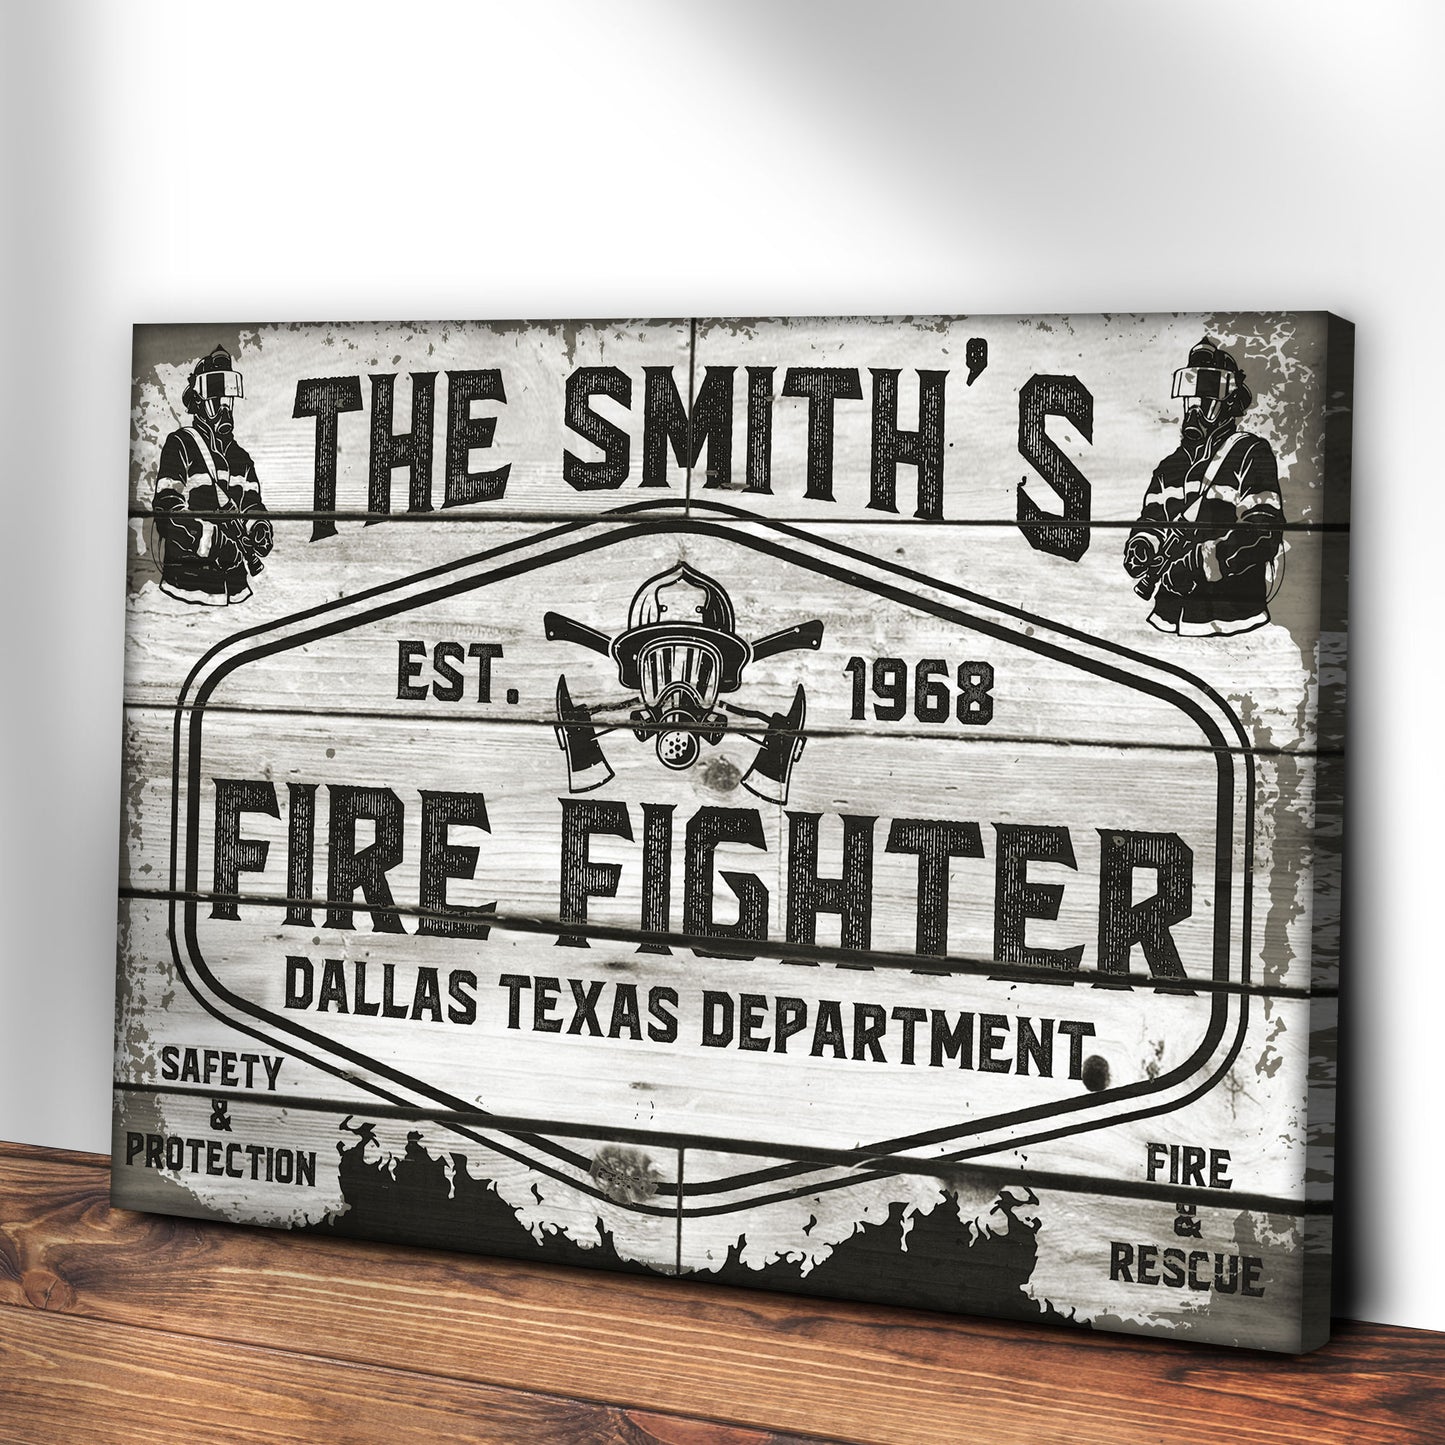 Fire & Rescue Fire Fighter Sign - Image by Tailored Canvases